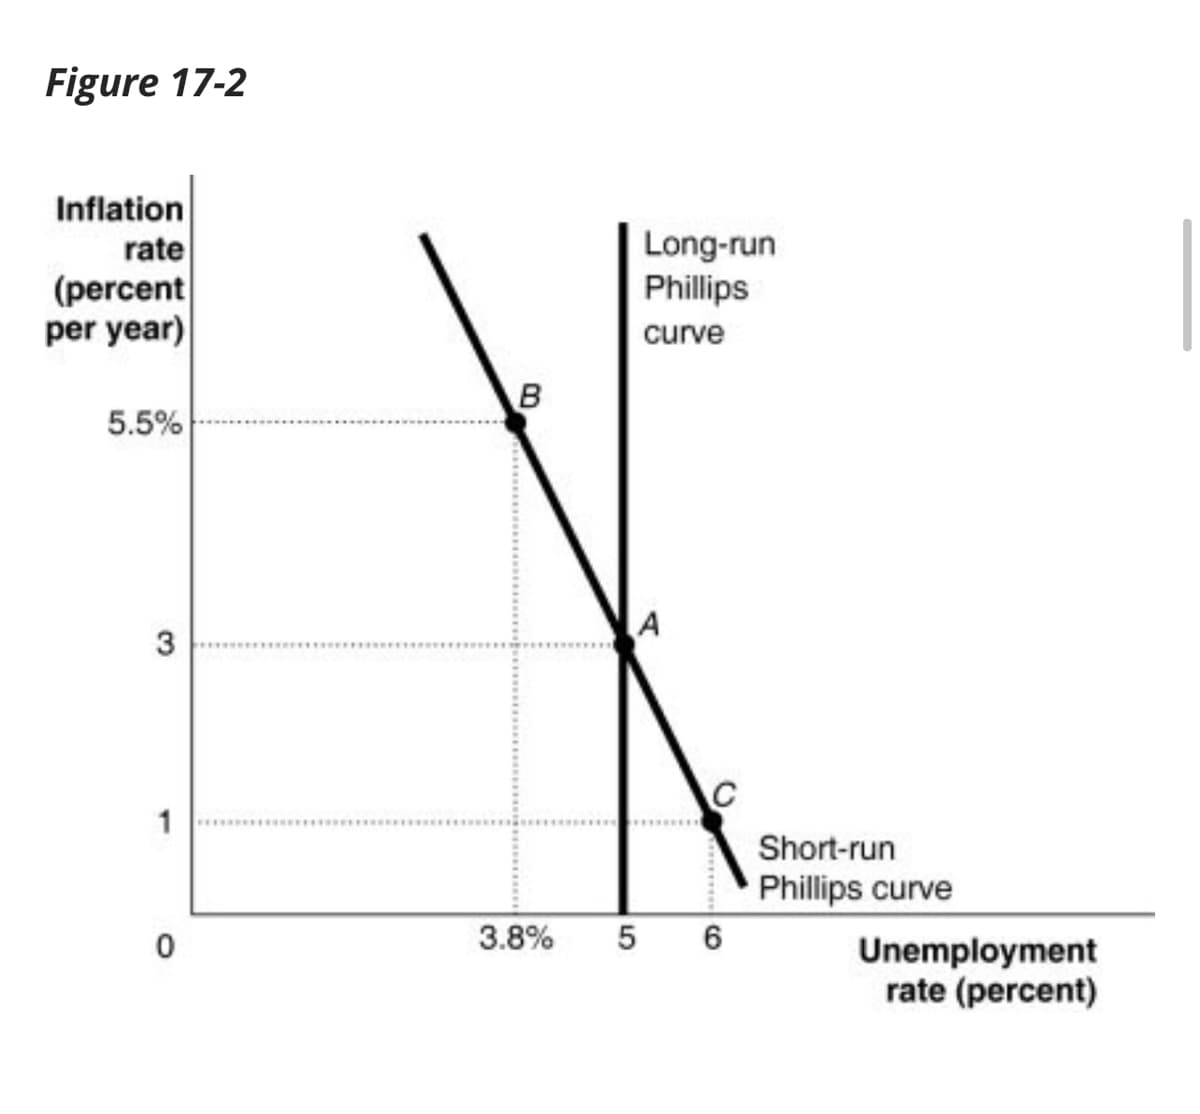 Figure 17-2
Inflation
rate
(percent
per year)
5.5%
3
1
0
B
Long-run
Phillips
curve
A
3.8% 5 6
Short-run
Phillips curve
Unemployment
rate (percent)